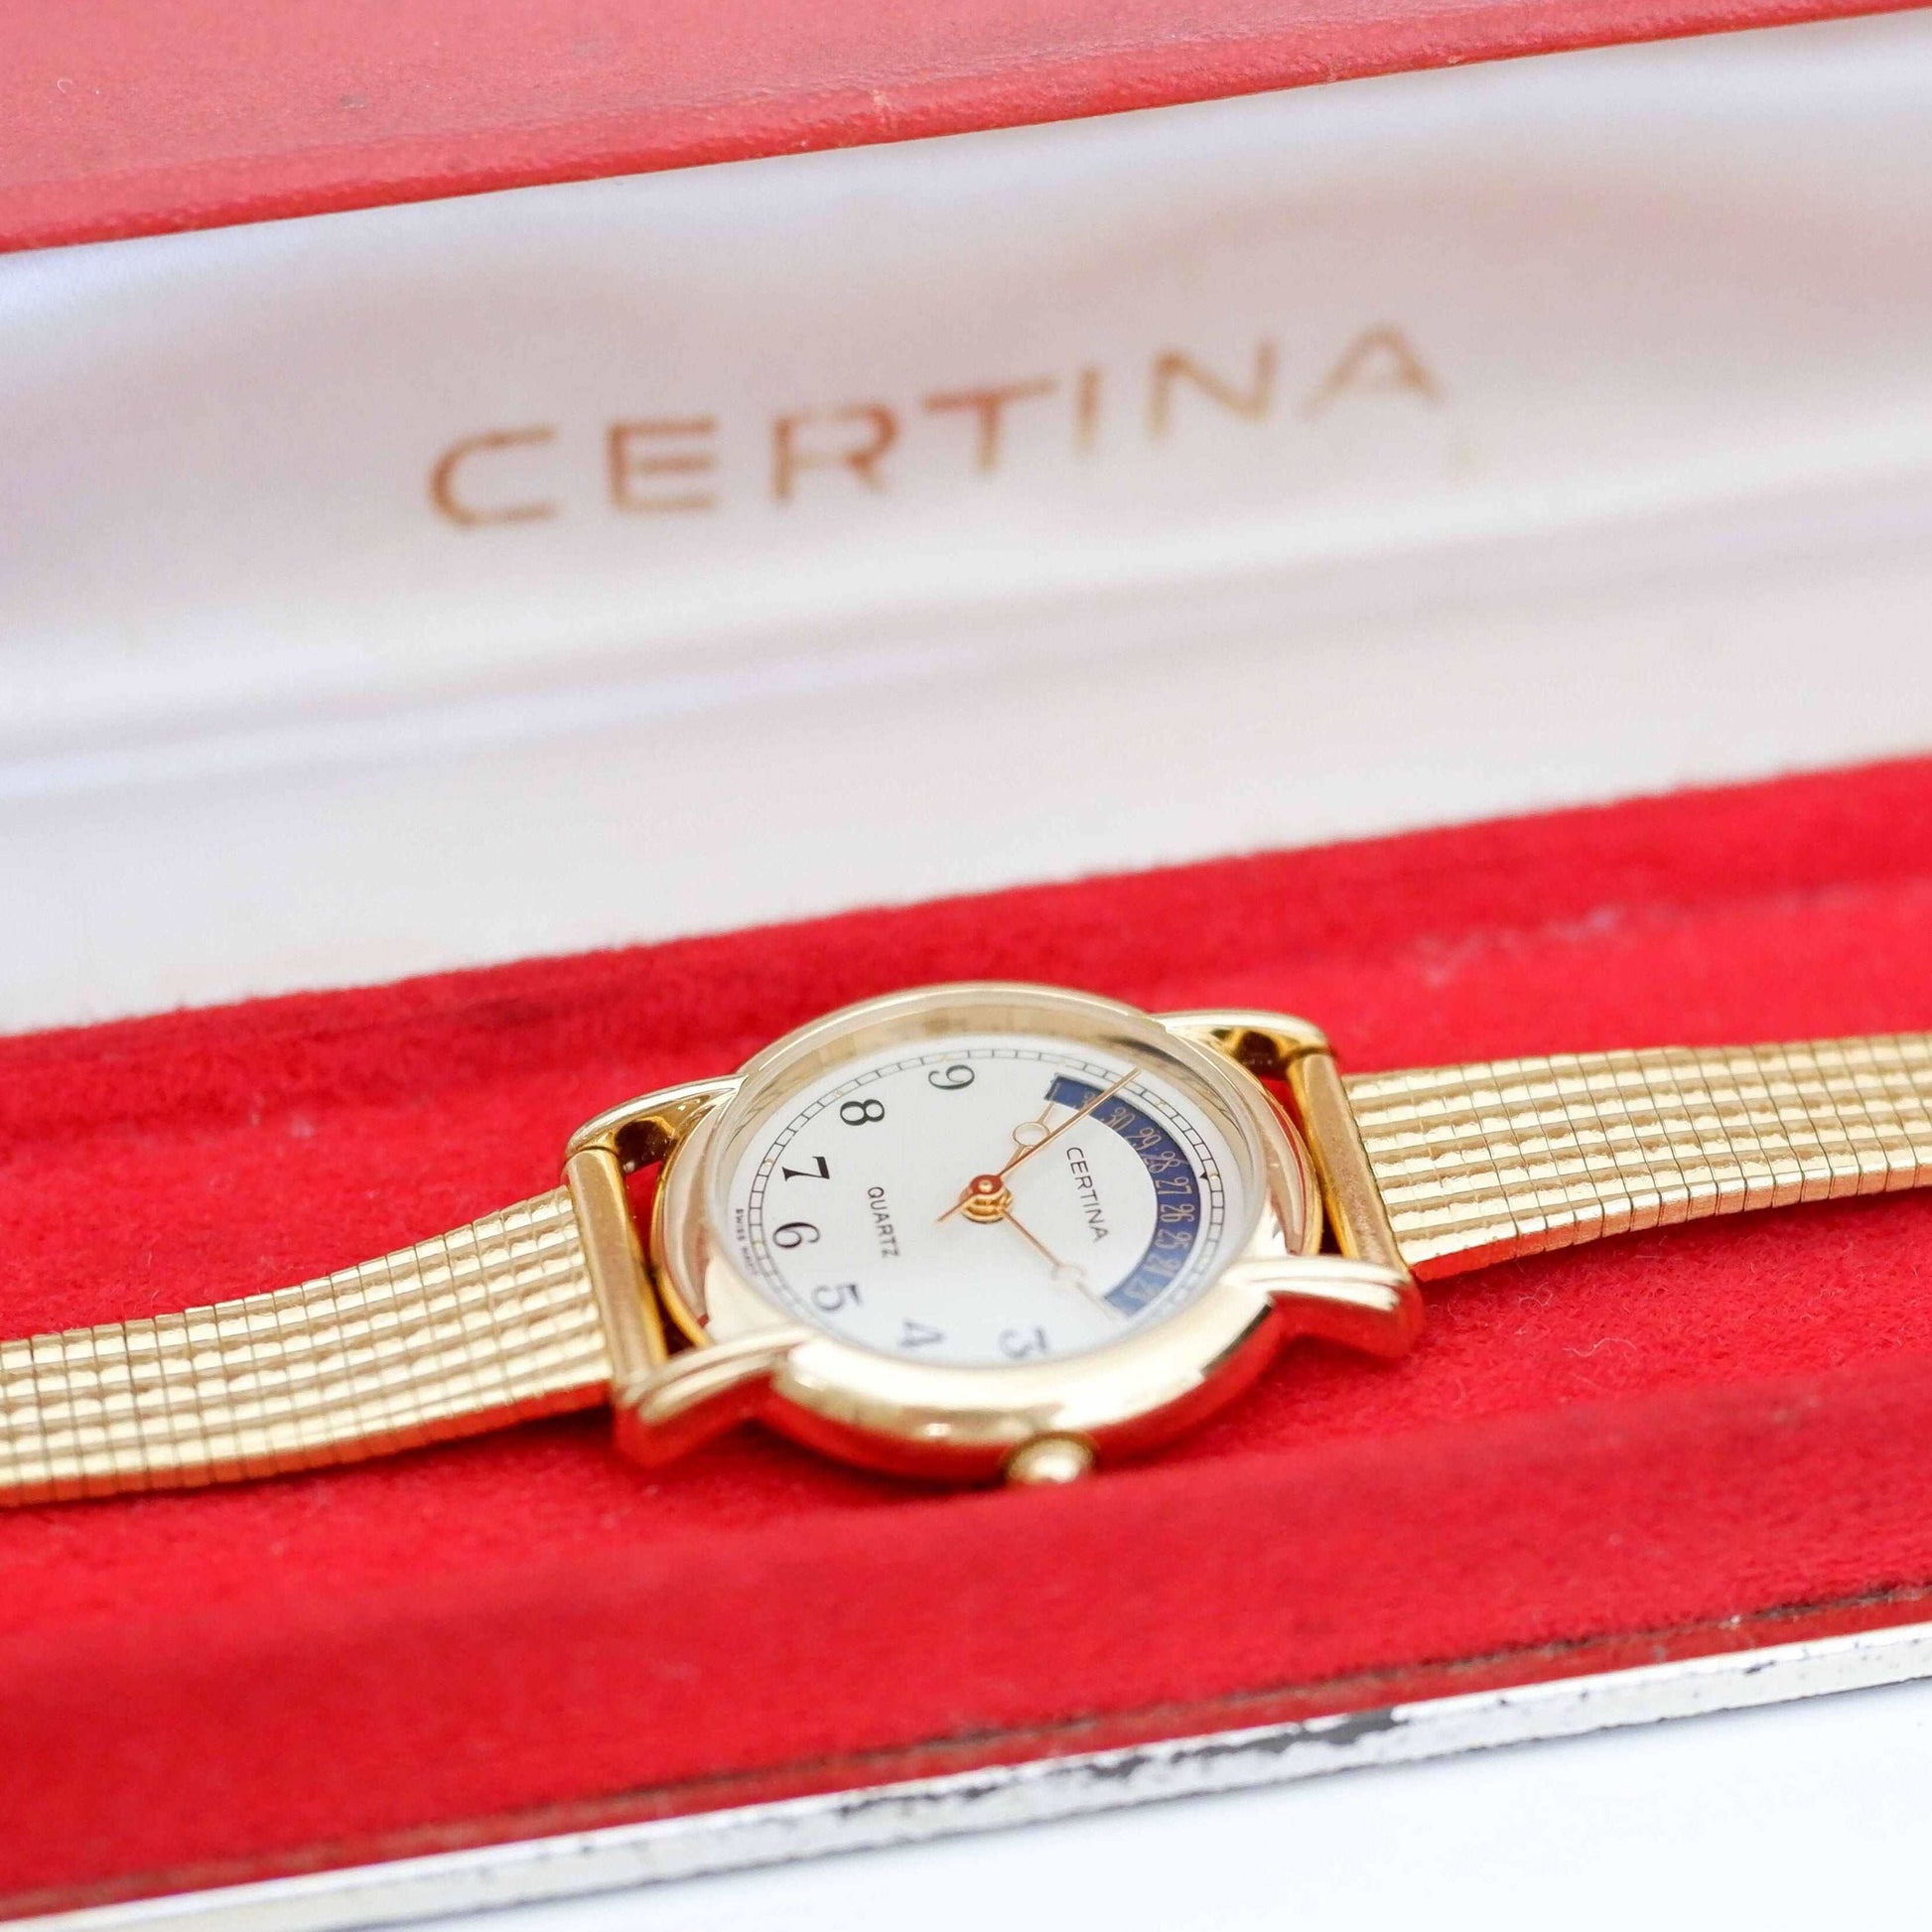 Certina Vintage Ladies Watch: 90s Gold, Blue Date and Classic Numerals, Packaging